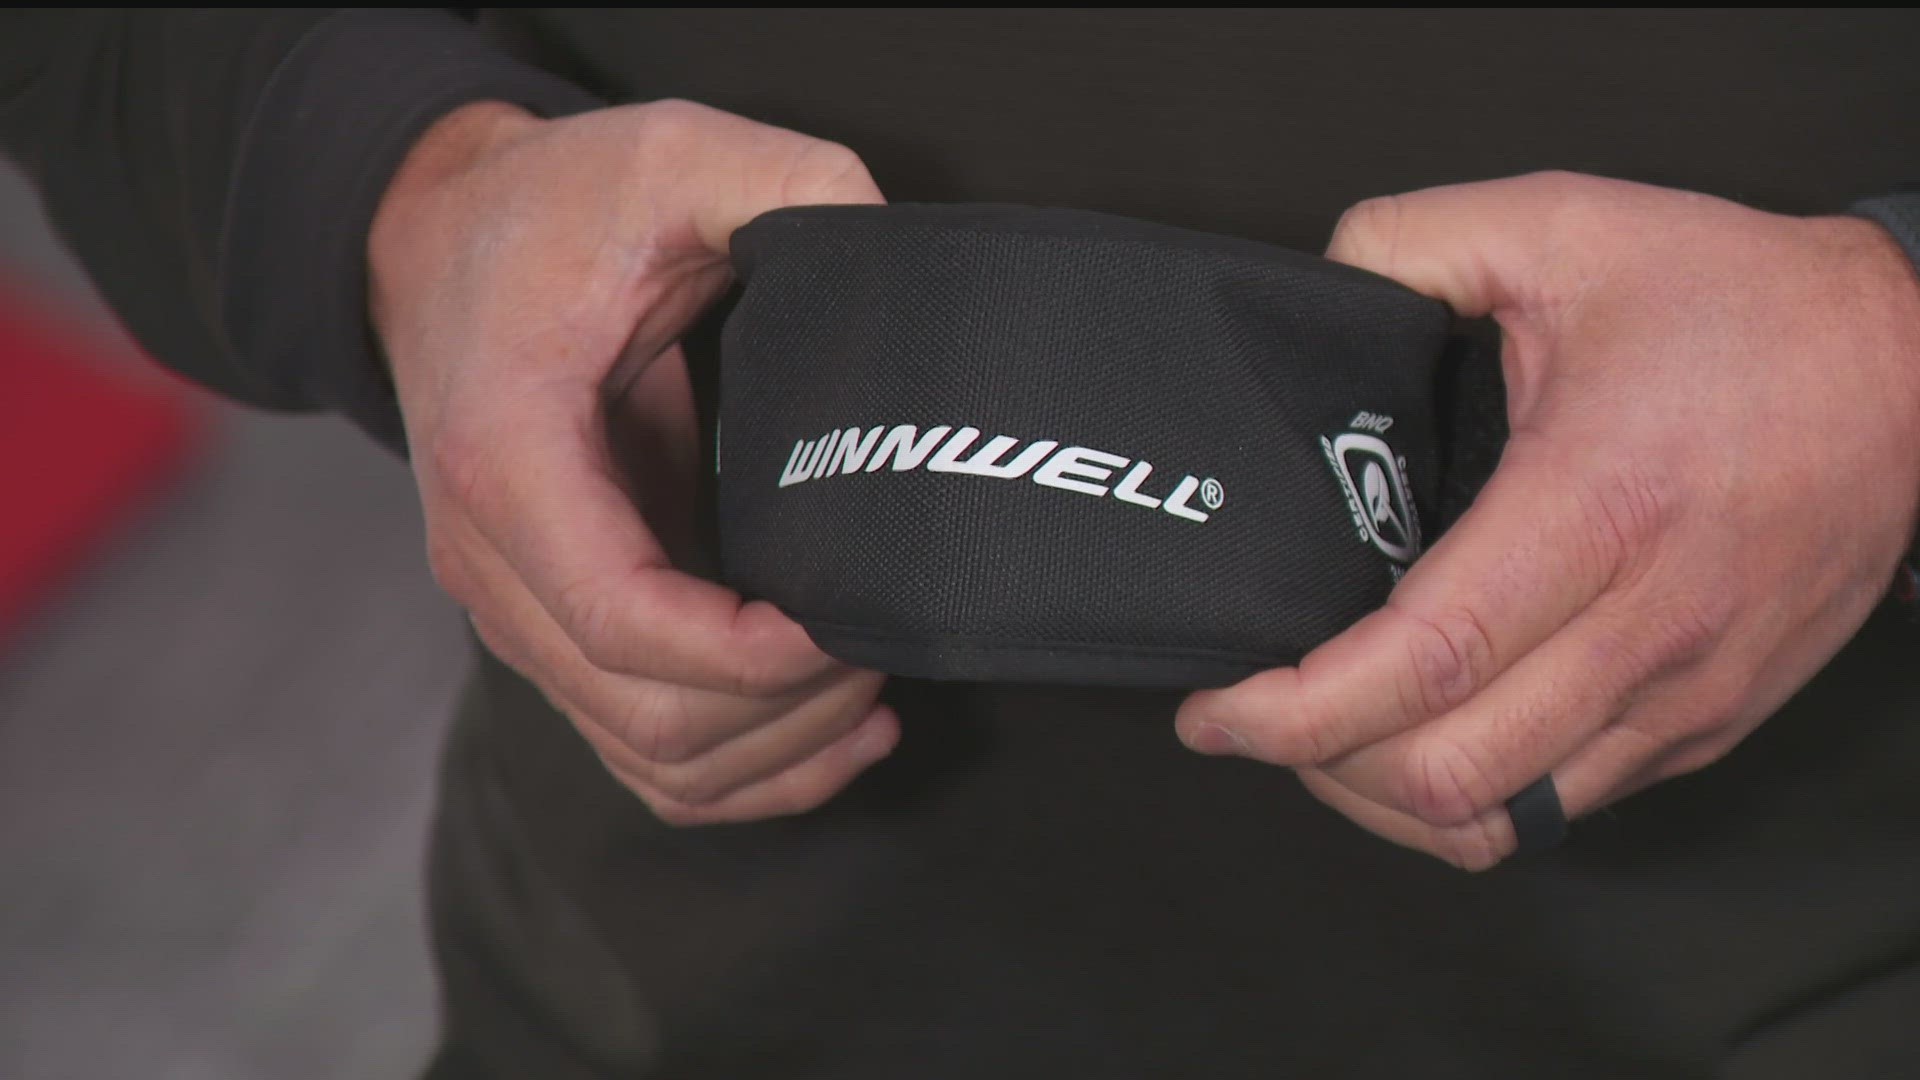 Warroad High School star turned pro T.J. Oshie launched a neck guard last month as part of clothing collection.